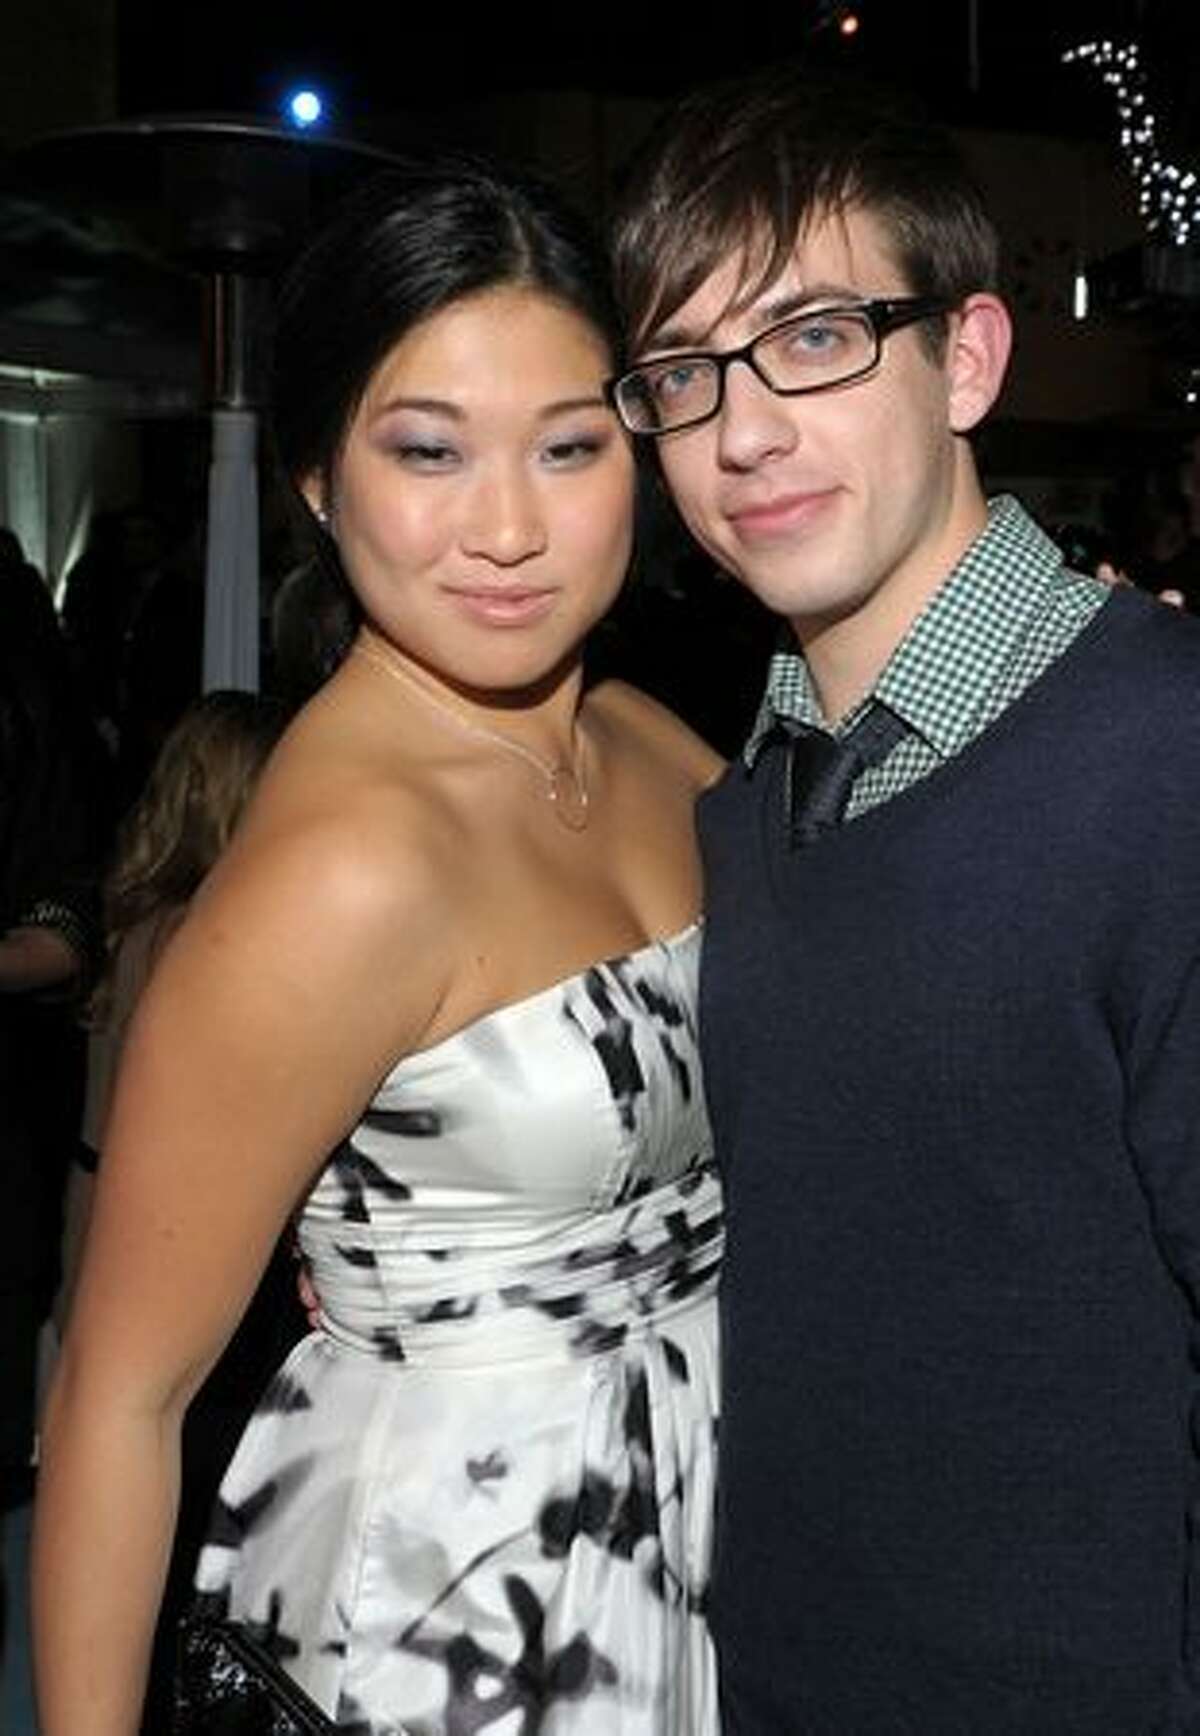 Actress Jenna Ushkowitz and actor Kevin McHale attend the Fox Winter 2010 All-Star Party held at Villa Sorisso on Monday in Pasadena, California.